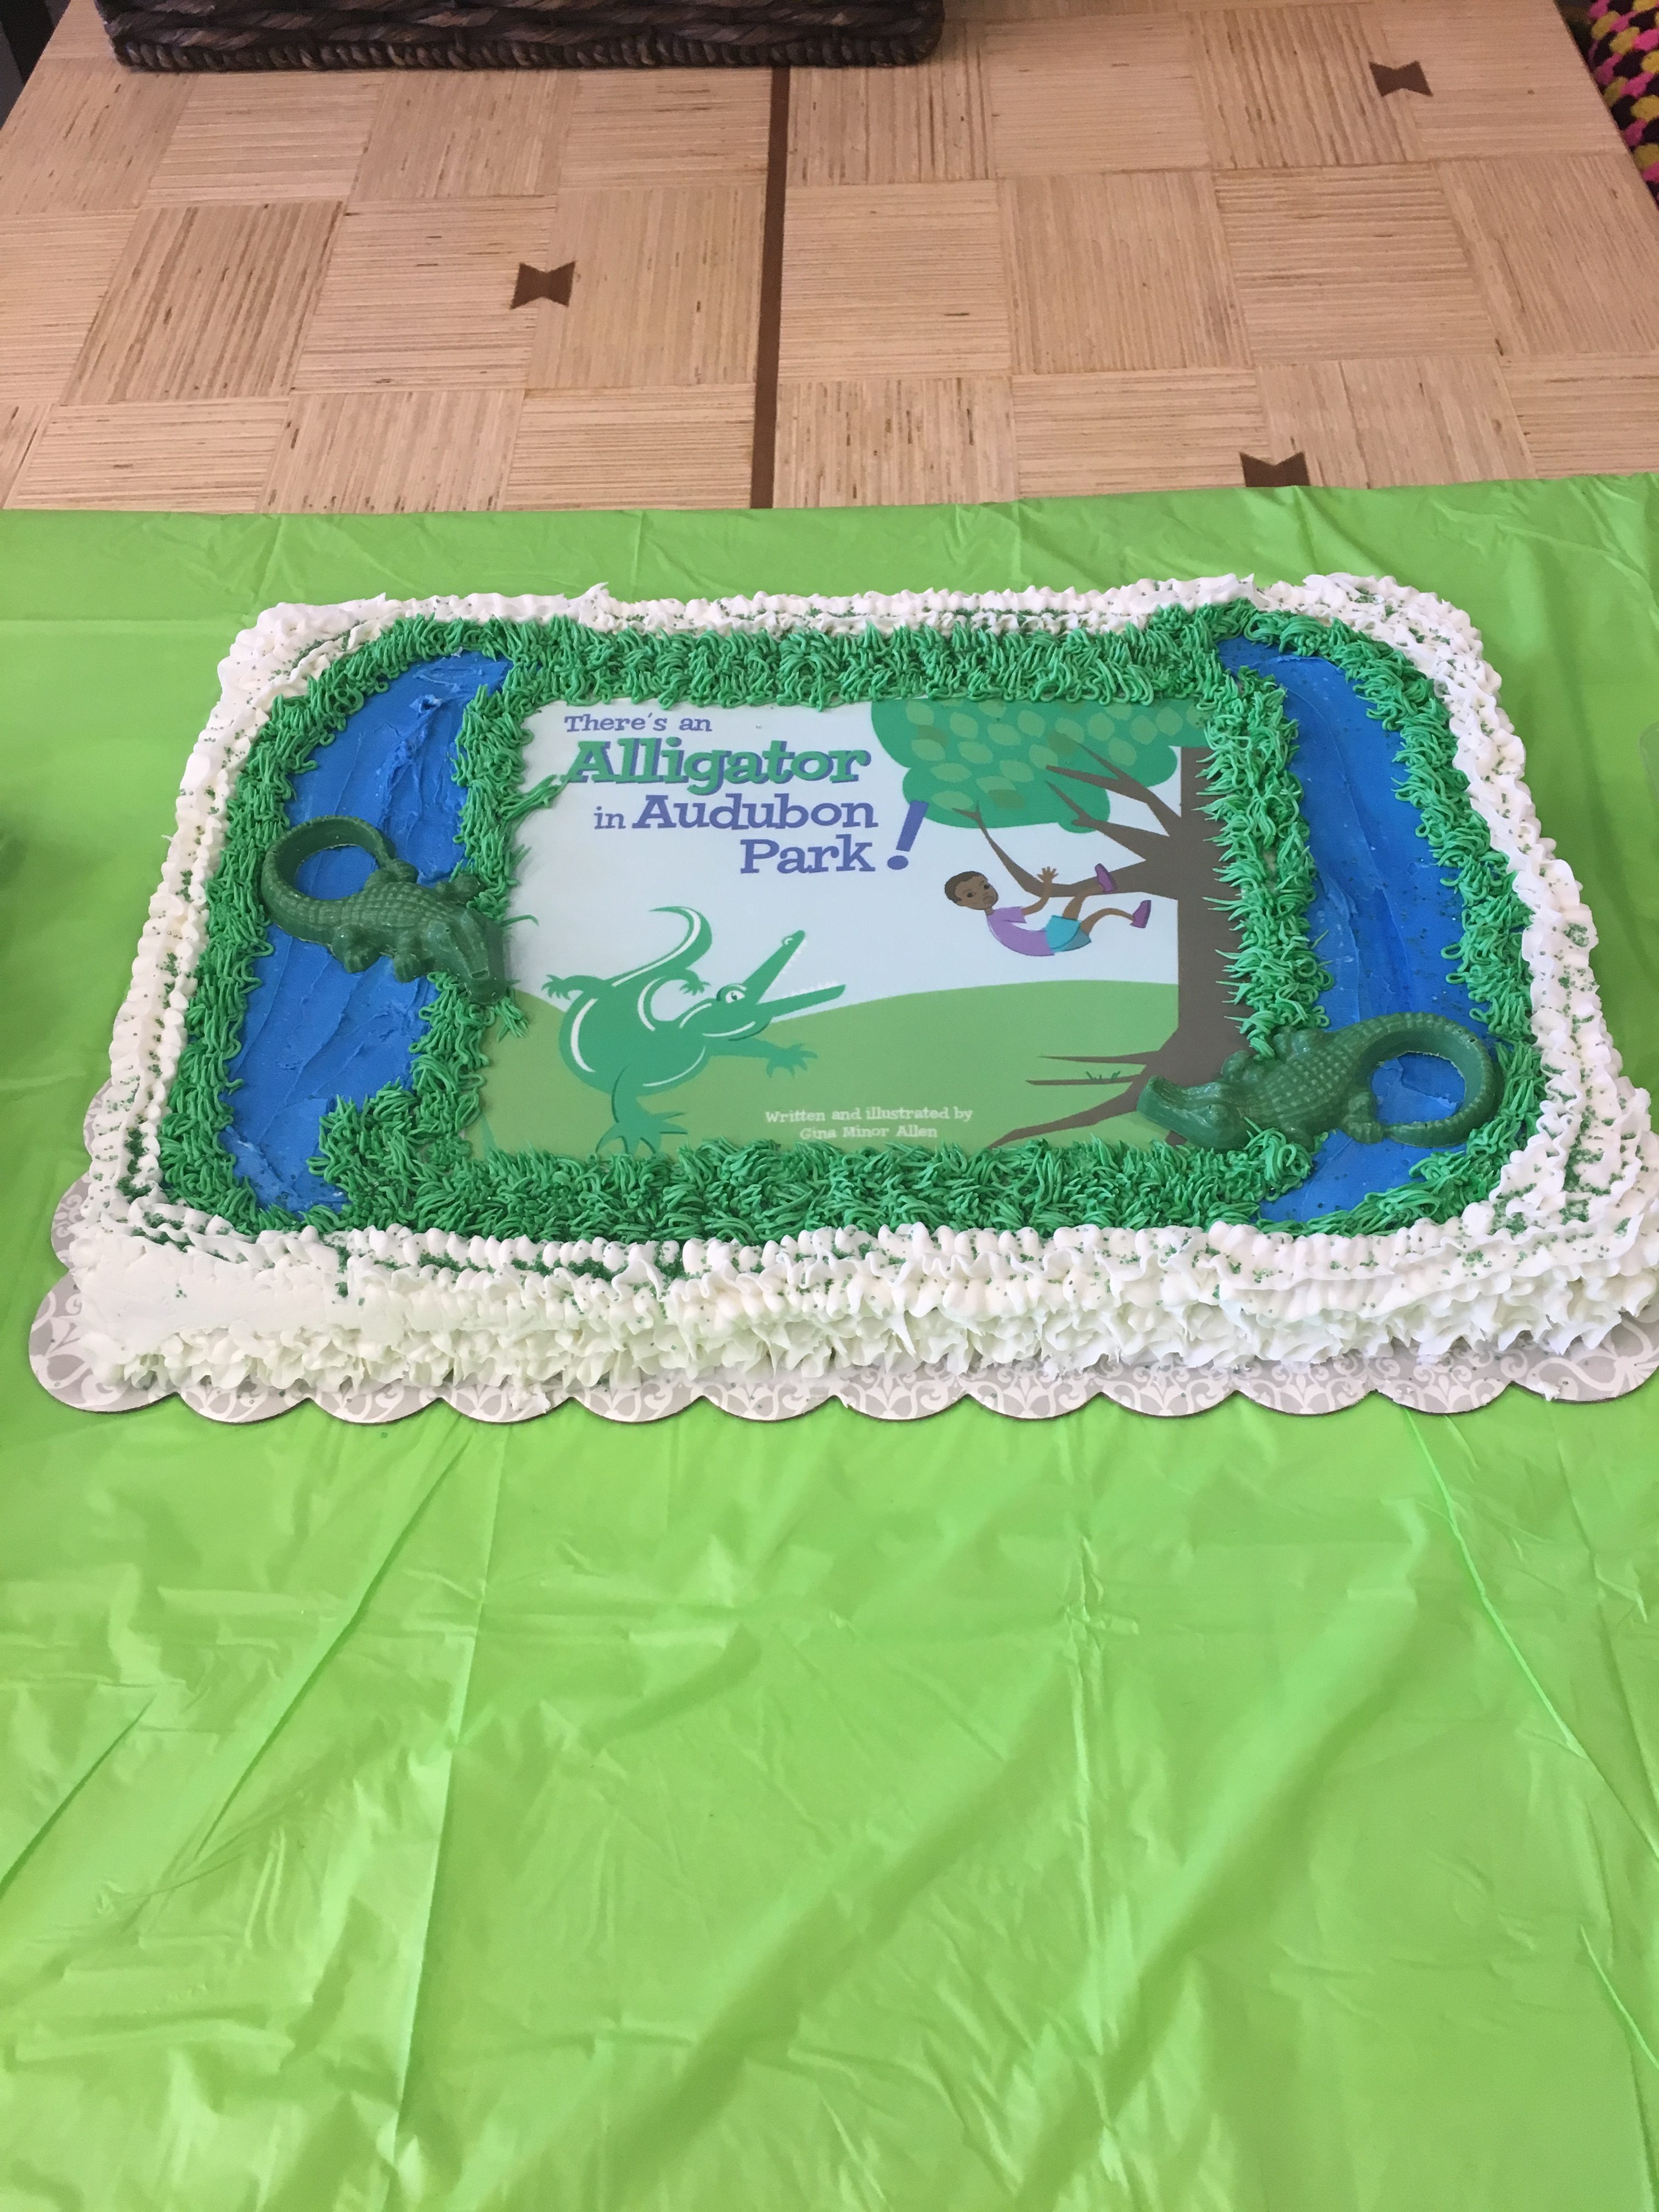 Cake featuring the book cover of "There's An Alligator in Audubon Park!"